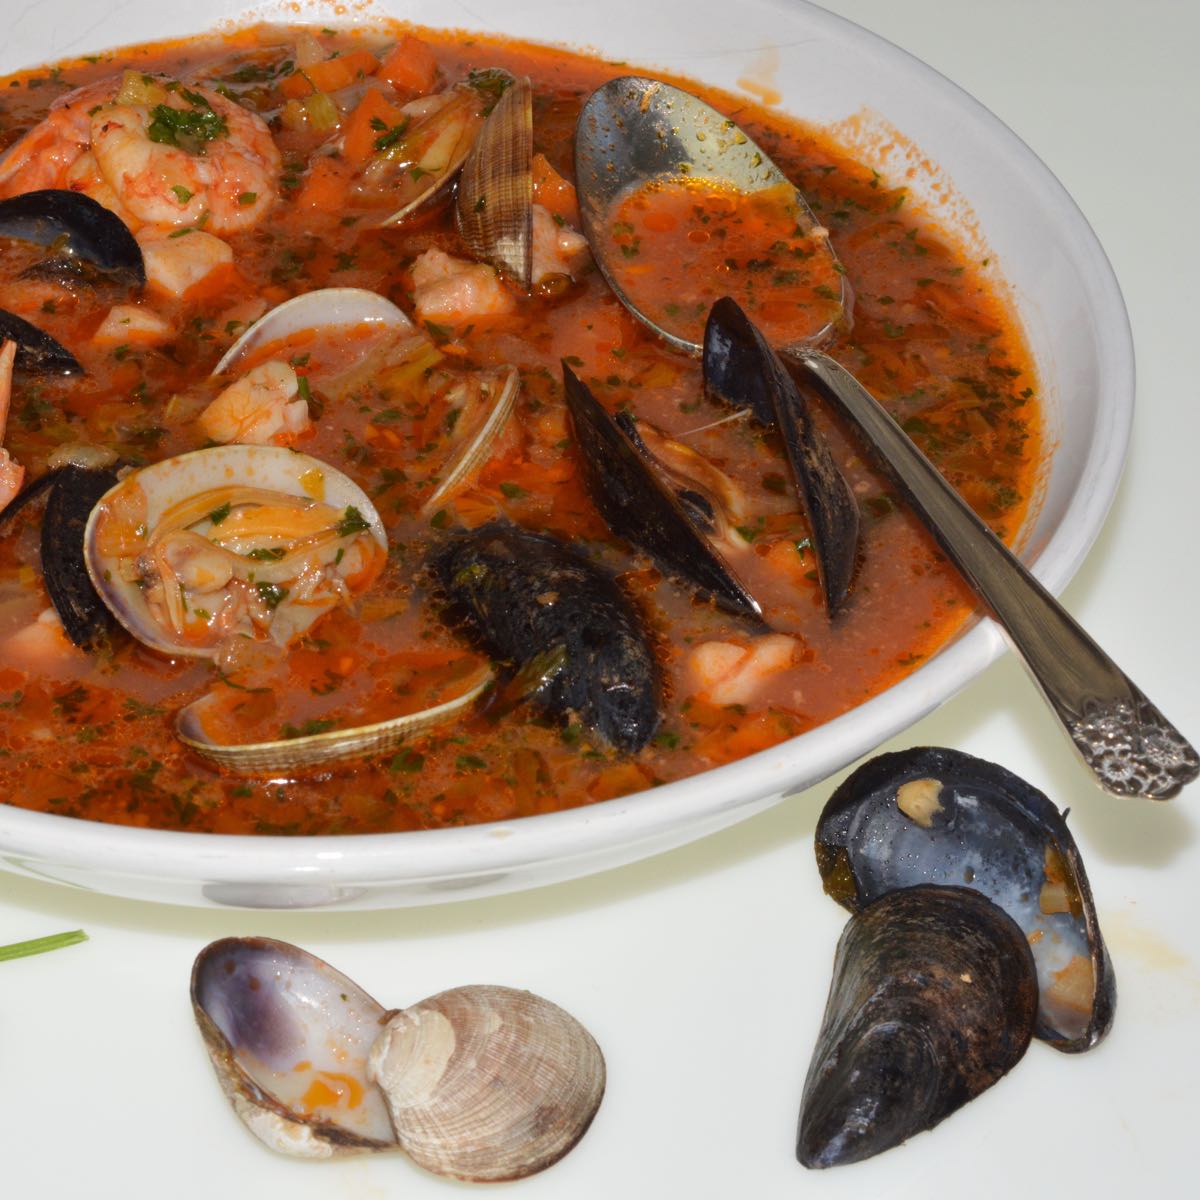 A bowl of Italian Fish and Shellfish Soup with mussels and clams.